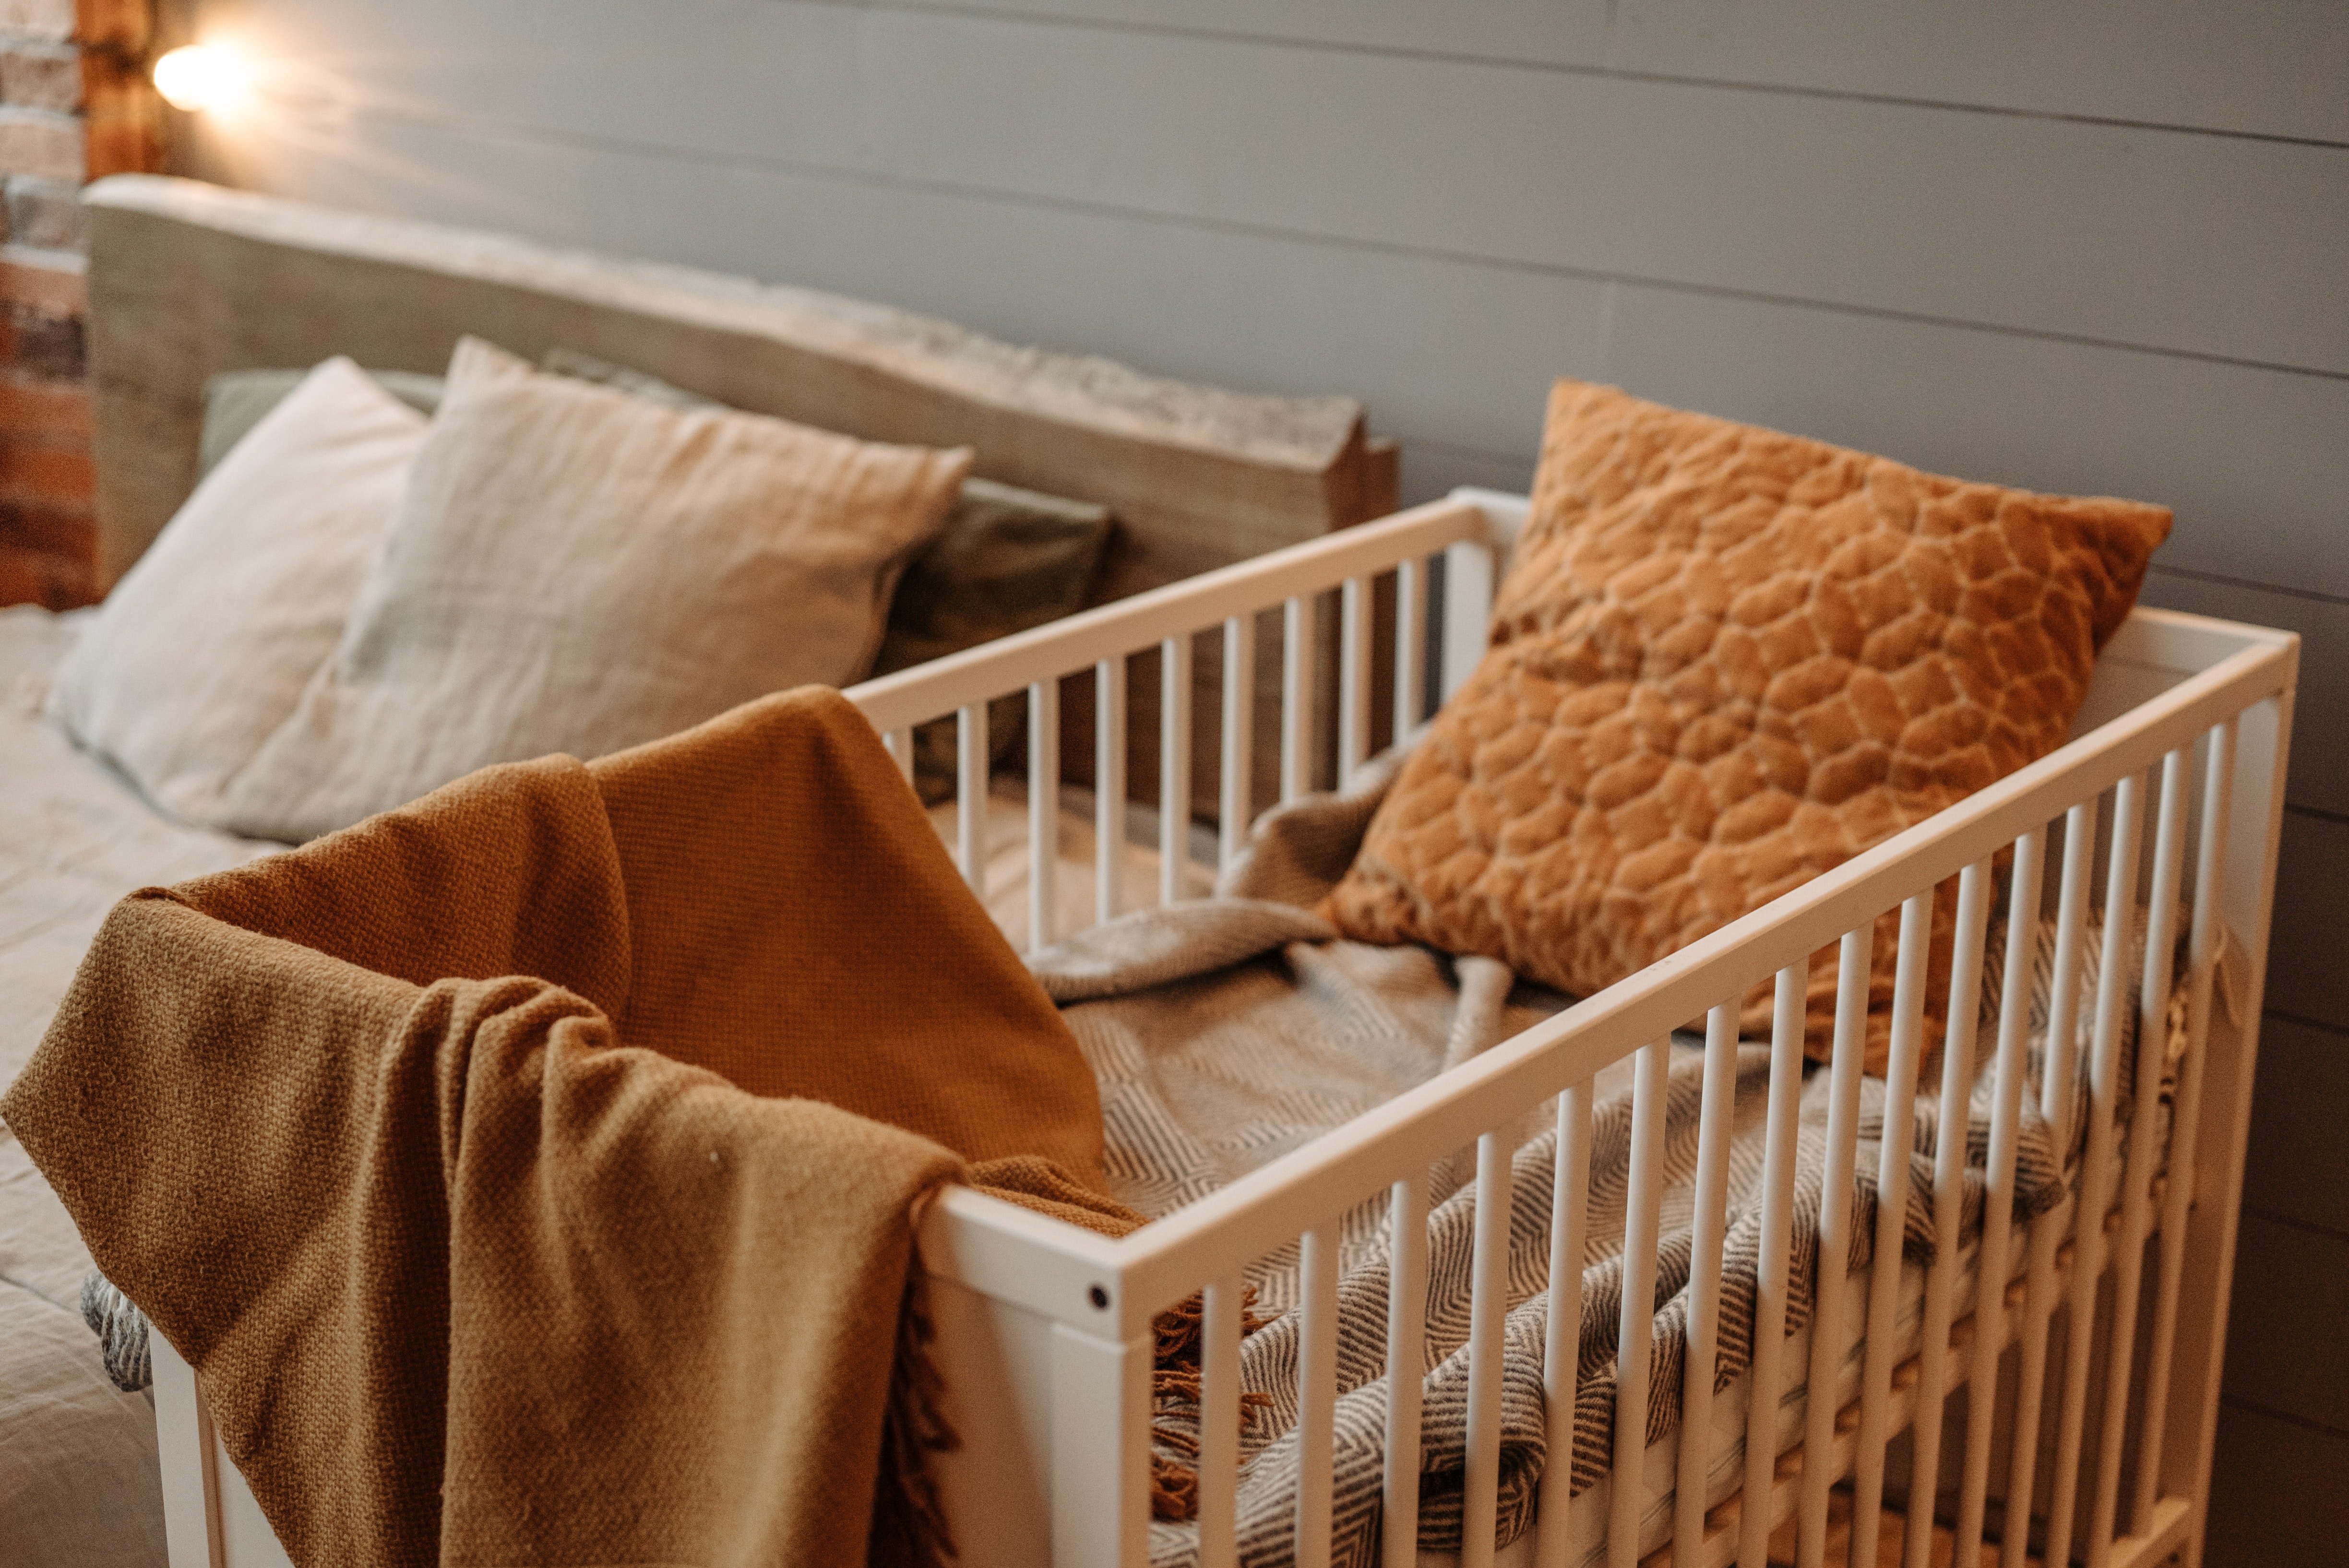 Grace refused to sell the wooden crib. | Source: Pexels